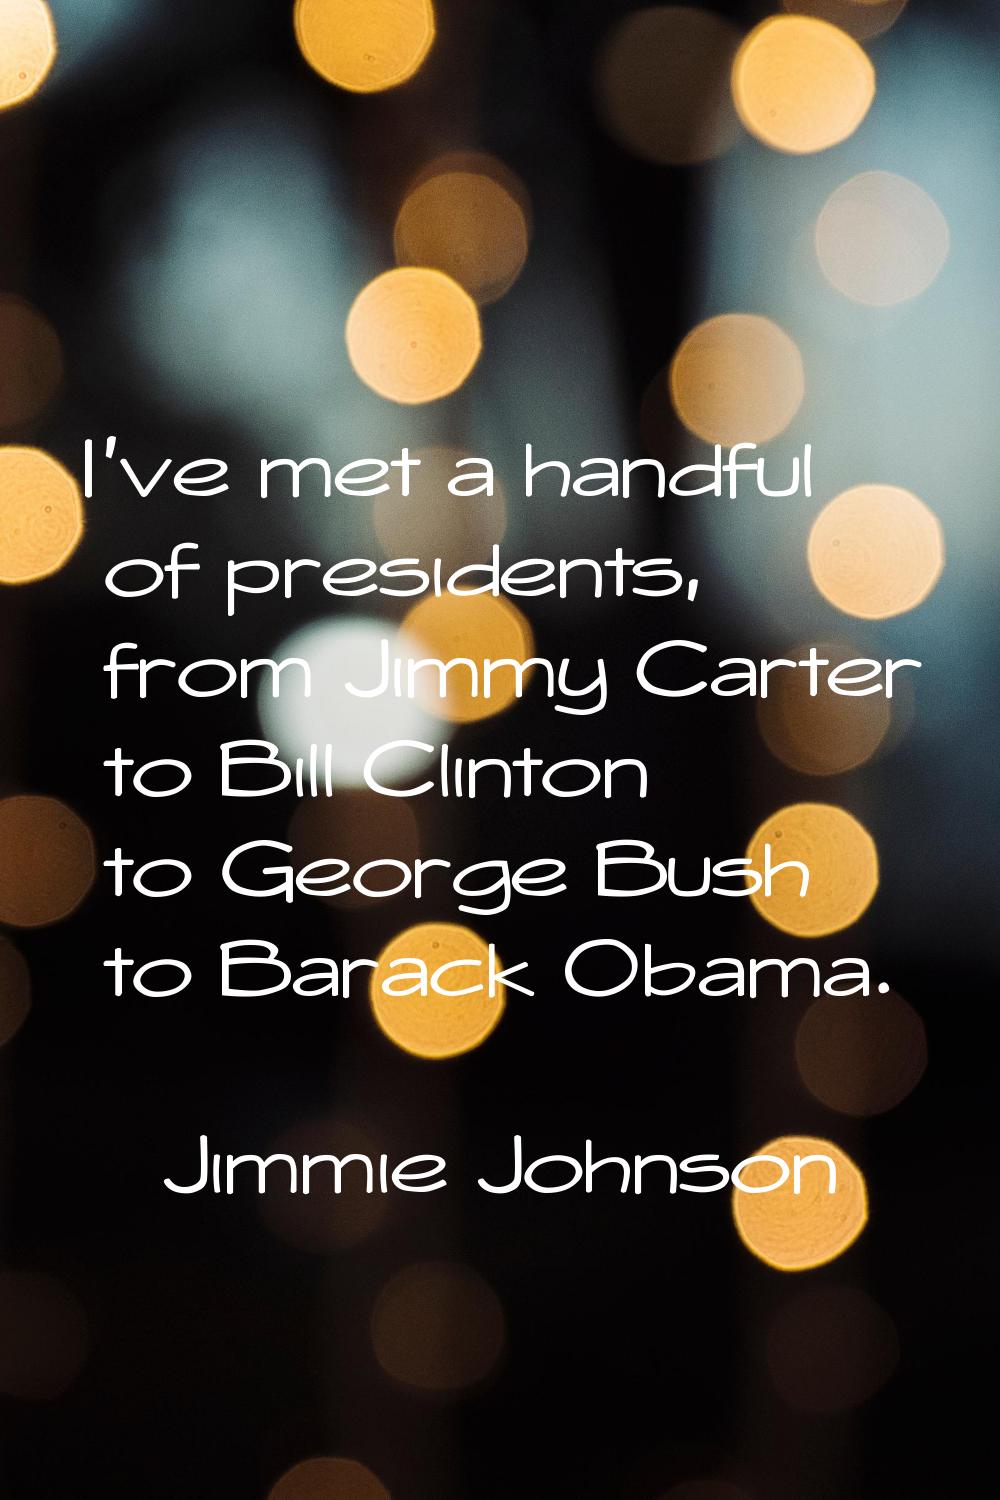 I've met a handful of presidents, from Jimmy Carter to Bill Clinton to George Bush to Barack Obama.